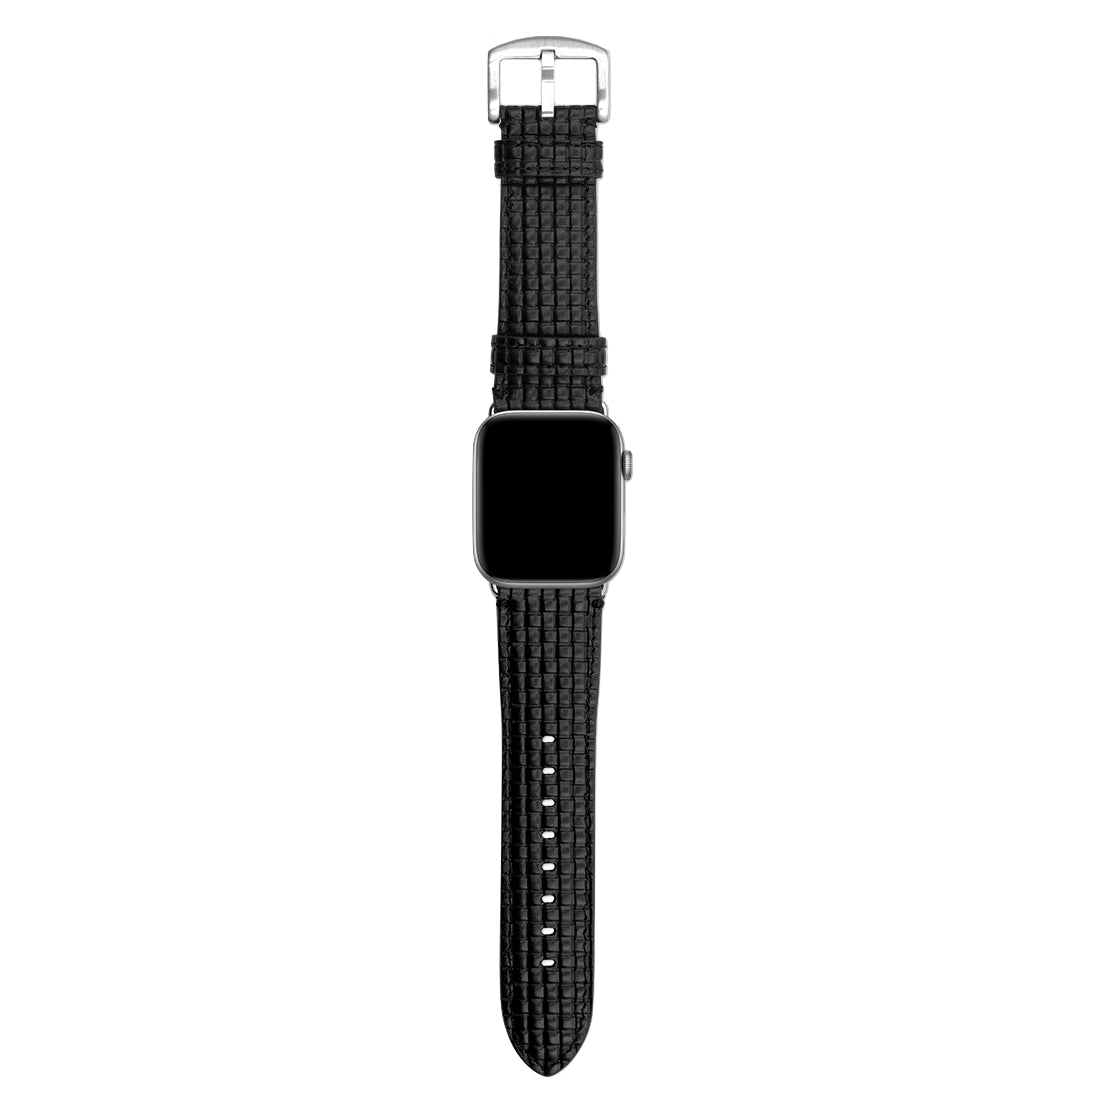 Genuine Leather Grass Pattern Handcrafted Apple Watch Band-Watch Band- phone case - phone cases- phone cover- iphone cover- iphone case- iphone cases- leather case- leather cases- DIYCASE - custom case - leather cover - hand strap case - croco pattern case - snake pattern case - carbon fiber phone case - phone case brand - unique phone case - high quality - phone case brand - protective case - buy phone case hong kong - online buy phone case - iphone‎手機殼 - 客製化手機殼 - samsung ‎手機殼 - 香港手機殼 - 買電話殼